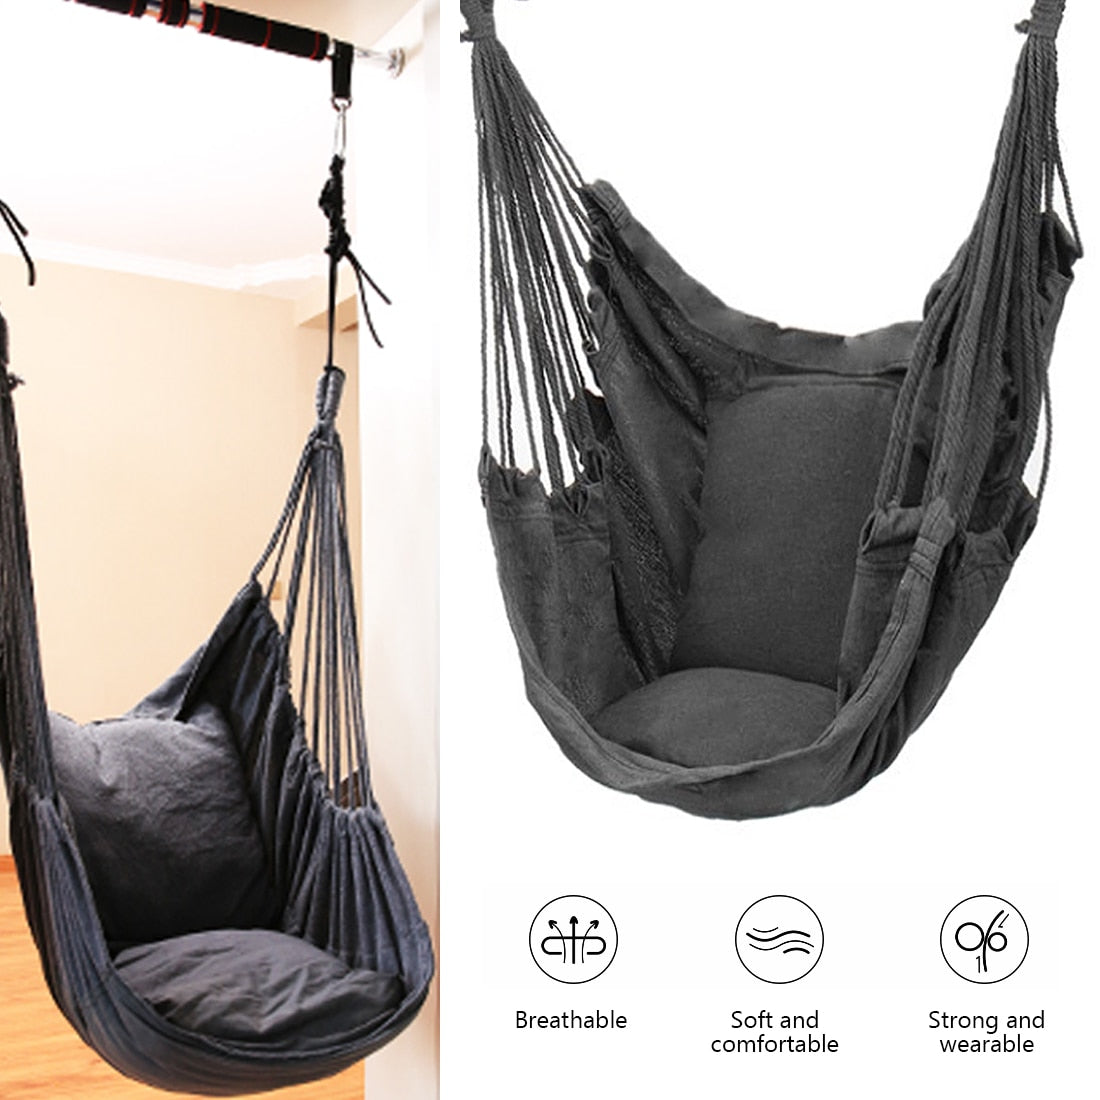 Hammock Portable Beach Chair Hanging Rope Chair Swing Chair Seat for Adults Kids Garden Hammock with Support Indoor Outdoor